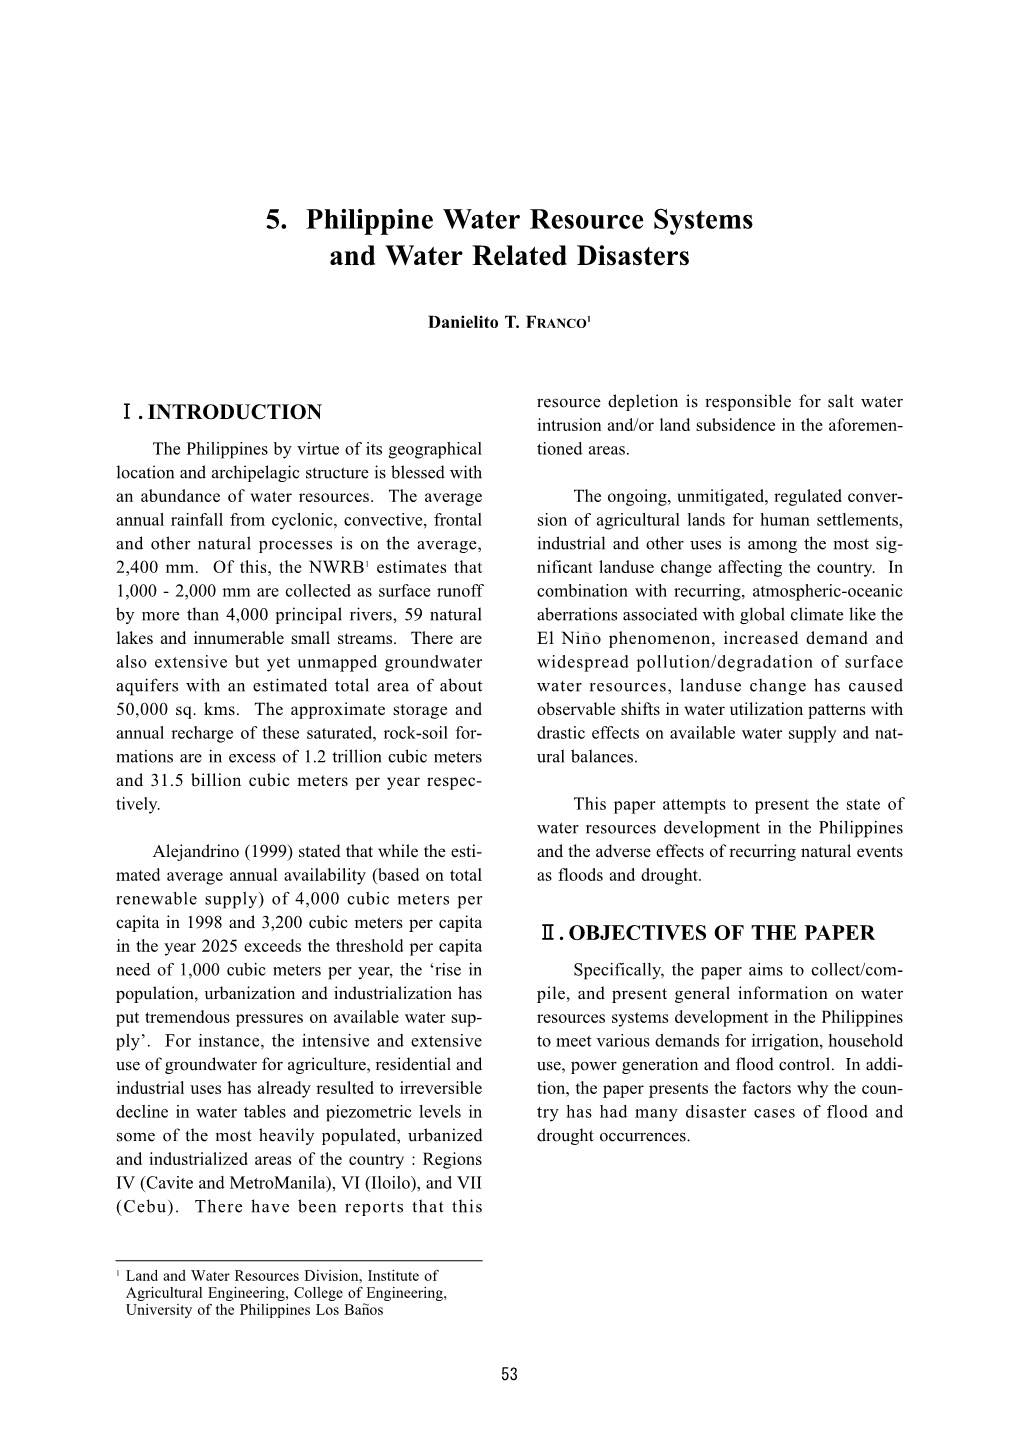 5. Philippine Water Resource Systems and Water Related Disasters